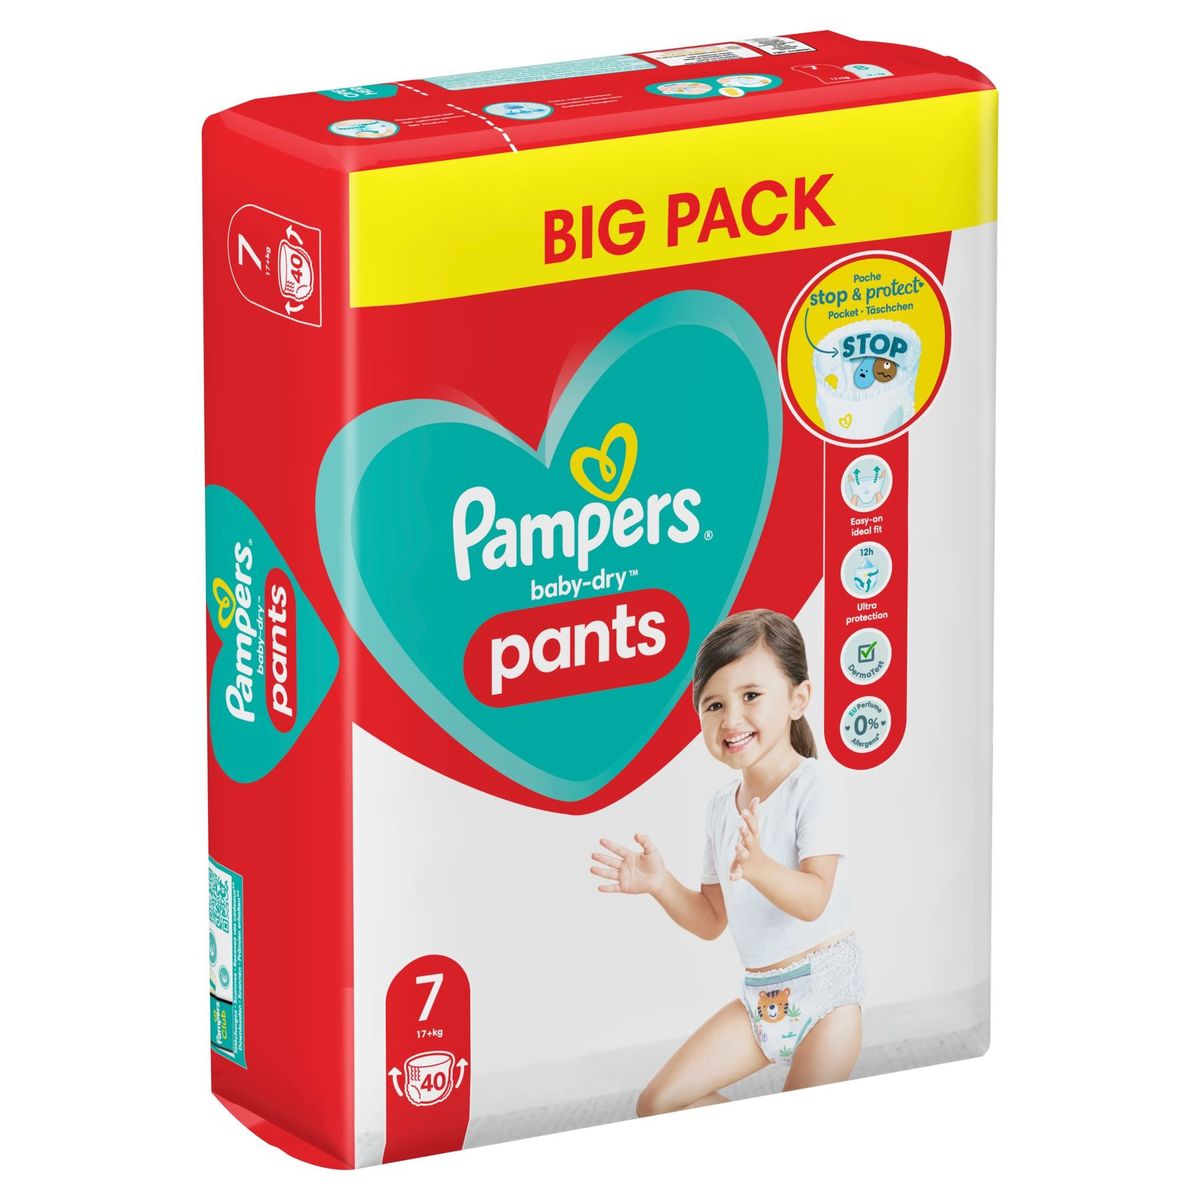 Pampers Baby-Dry Pants Couches-Culottes Taille 7, x40, 17kg+